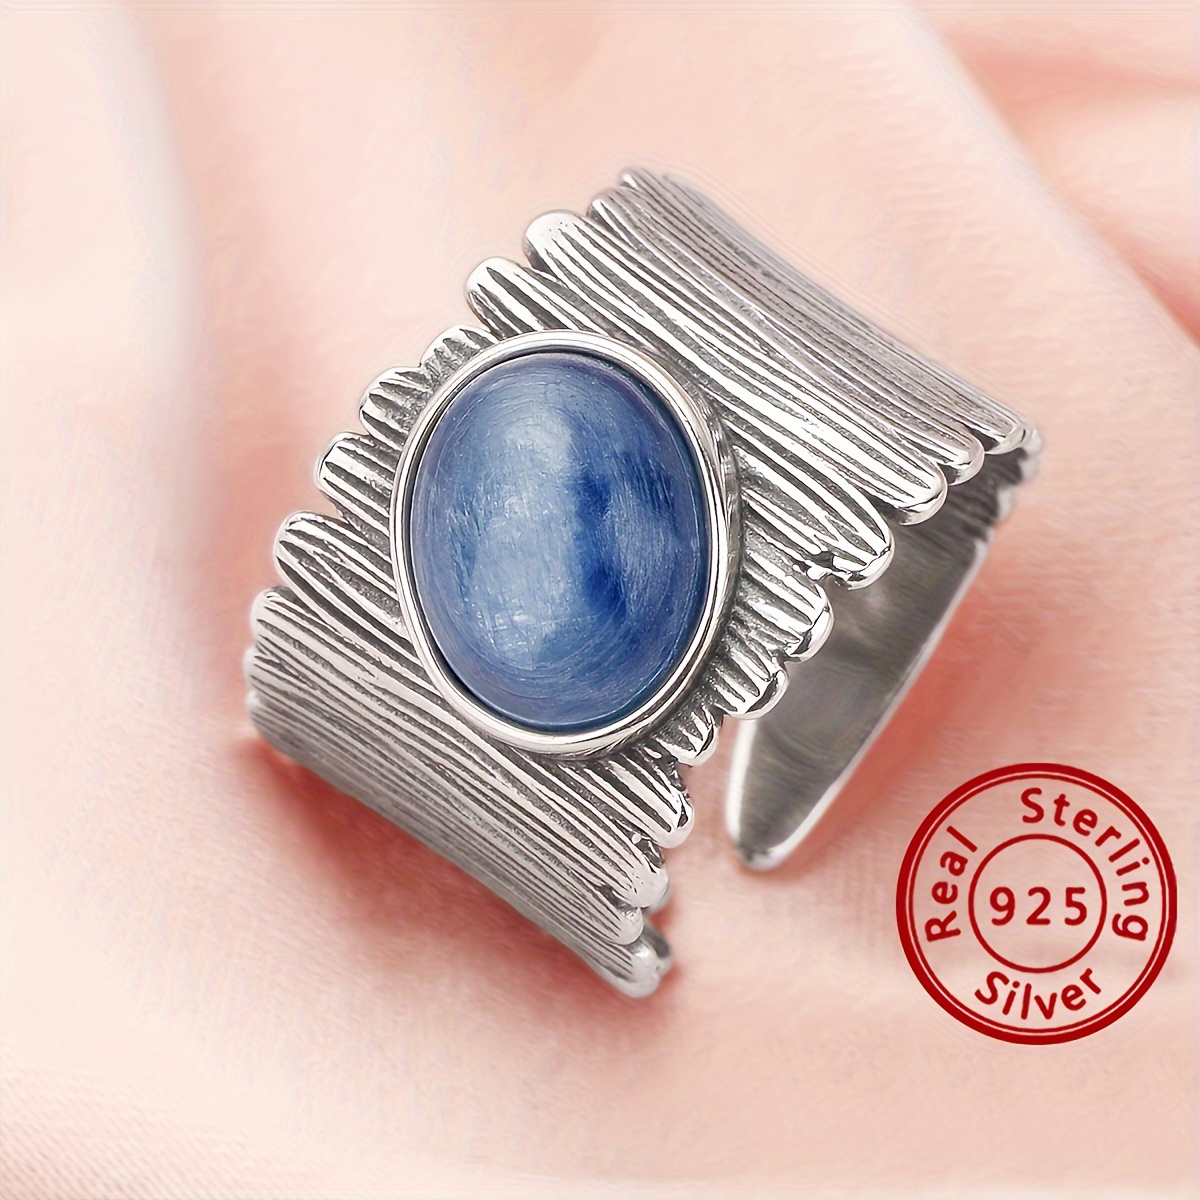 

925 Sterling Silver Inlaid Oval Natural Blue Crystal Stone Vintage Open Adjustable Ring Elegant Finger Jewelry Gift For Women With Gift Box